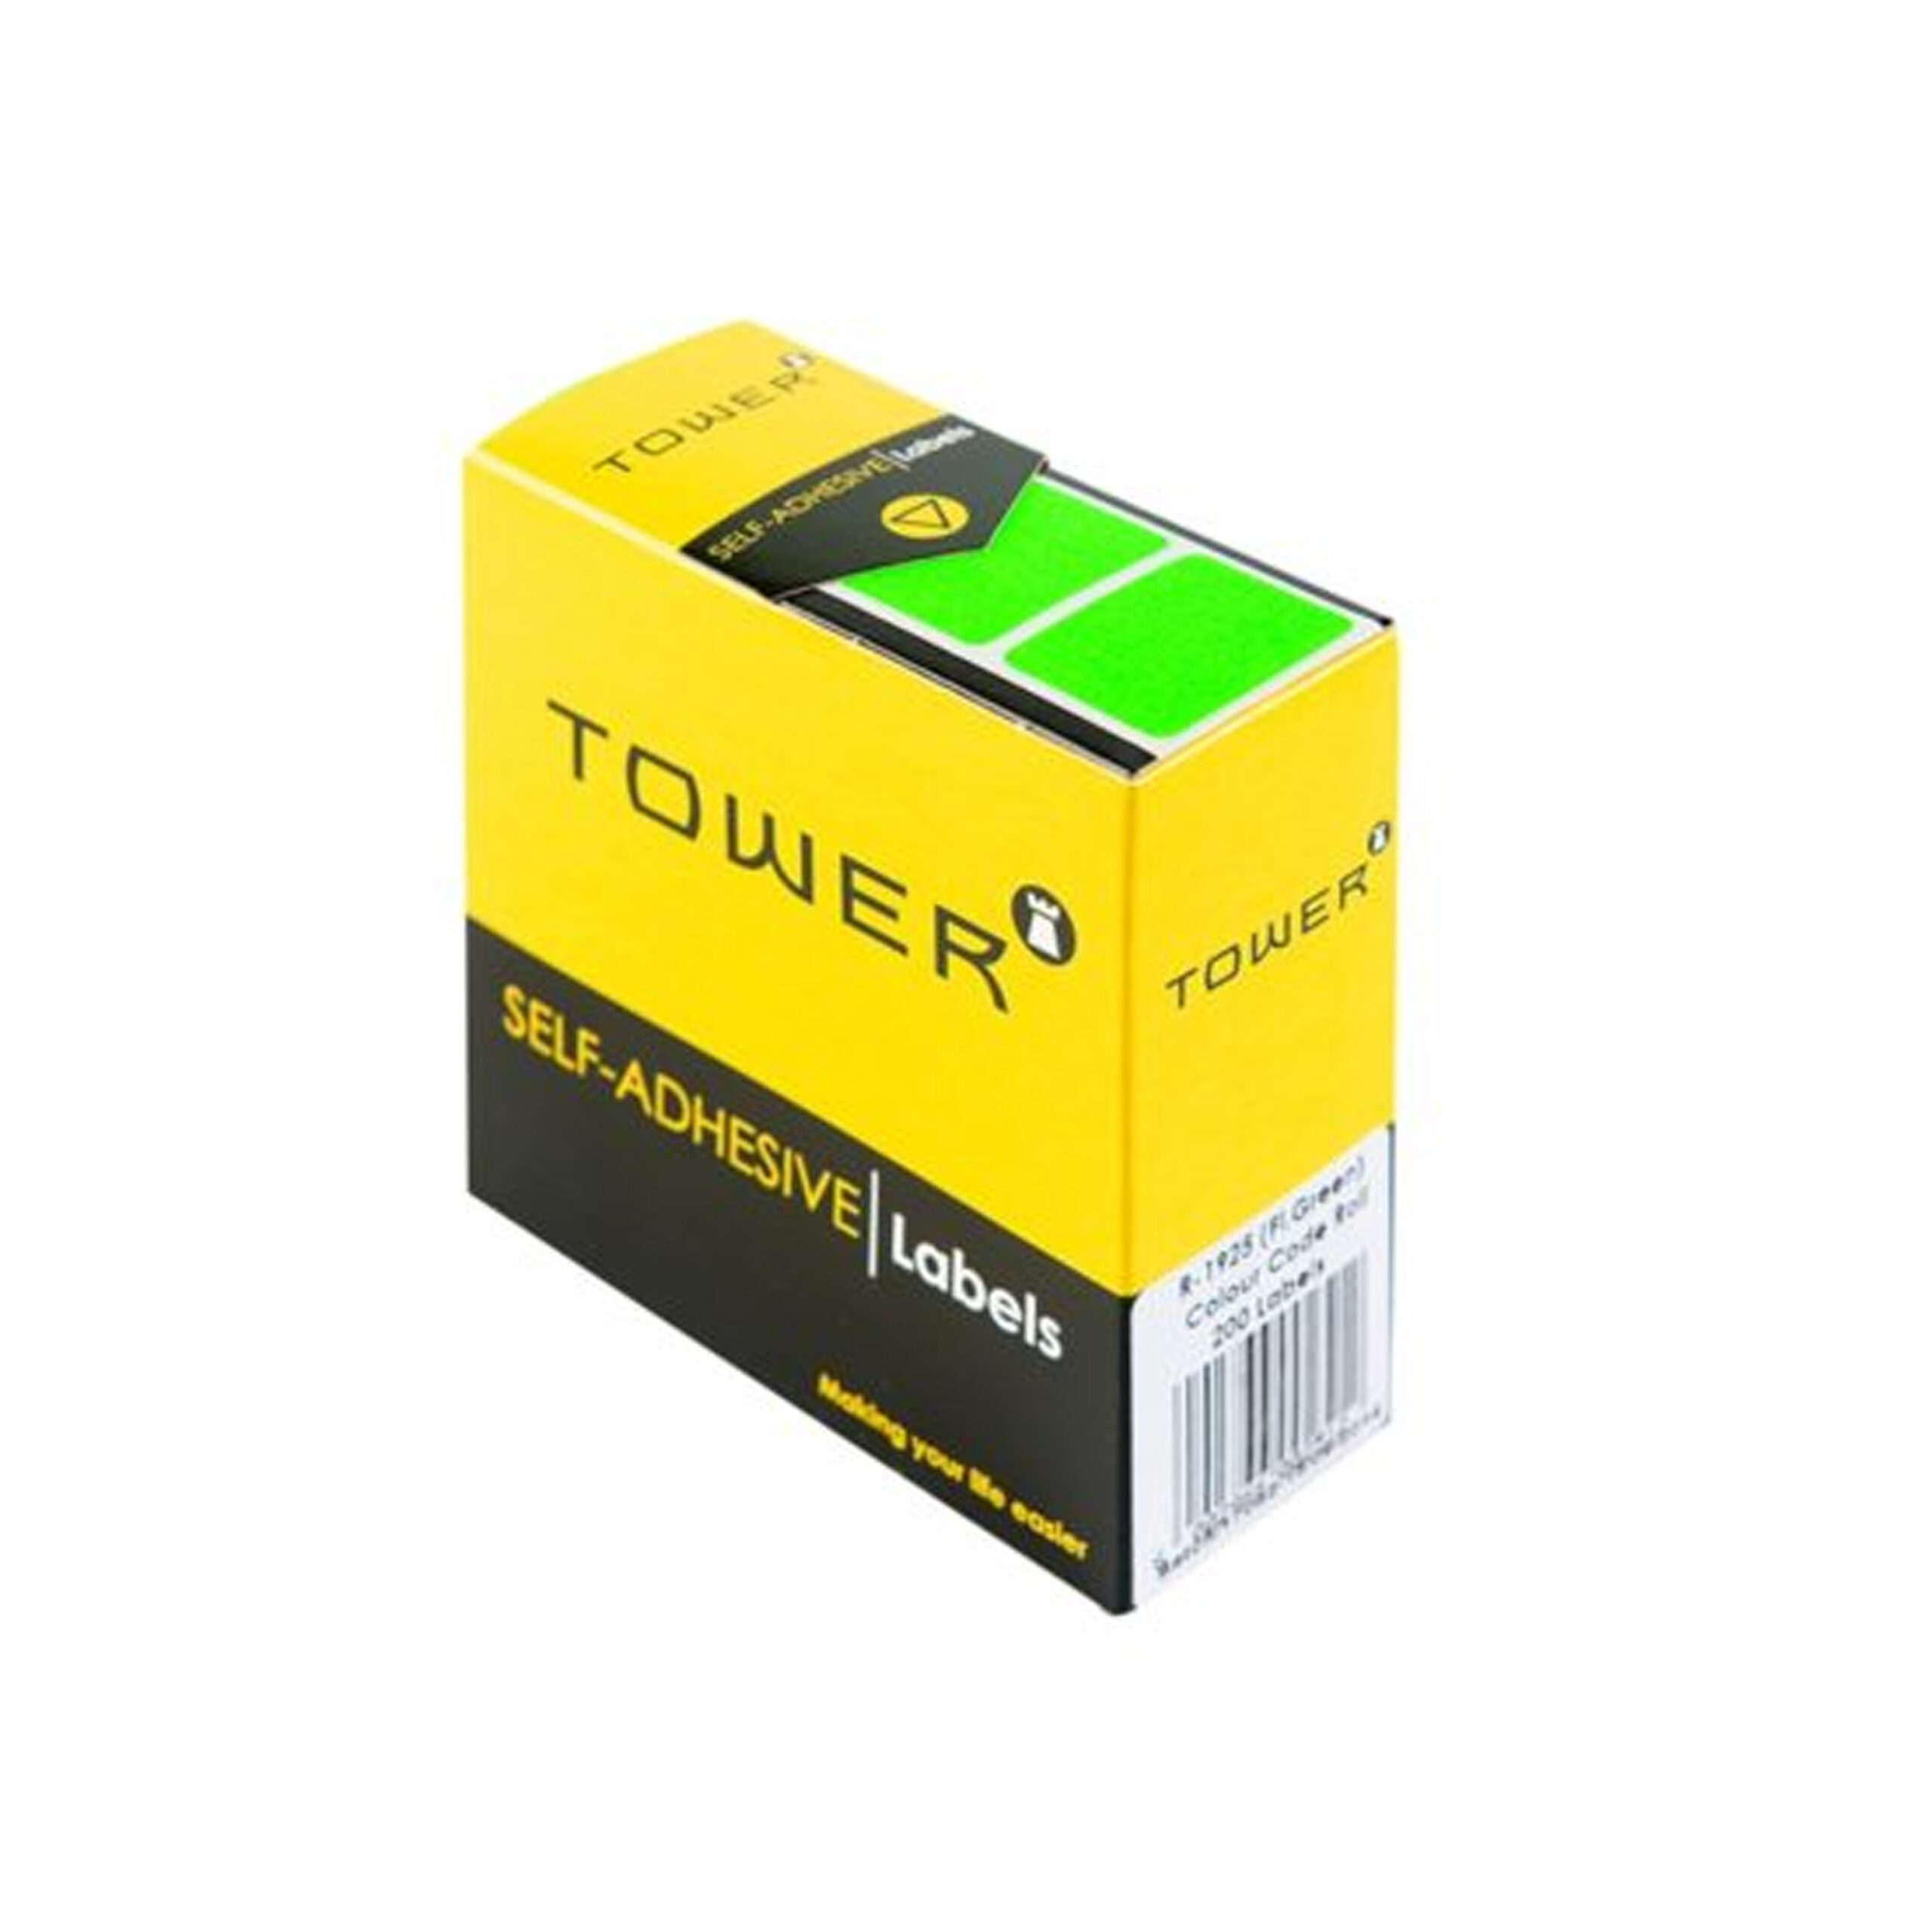 TOWER  SELF
ADHESIVE FLU.
GREEN LABELS 
19x25mm (200
LABELS)